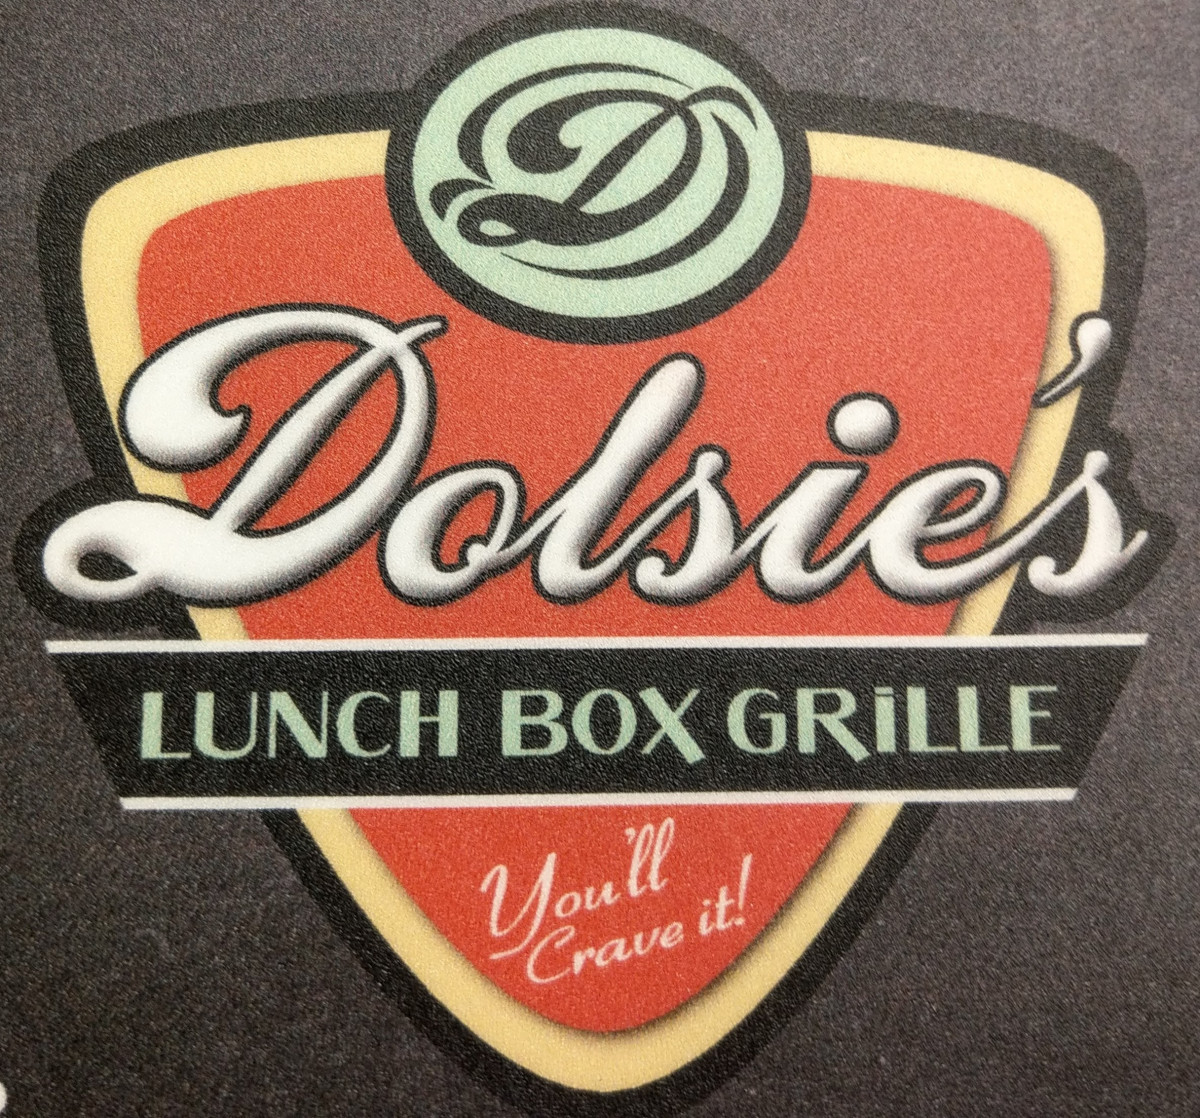 Dolsies Lunch Box Grille